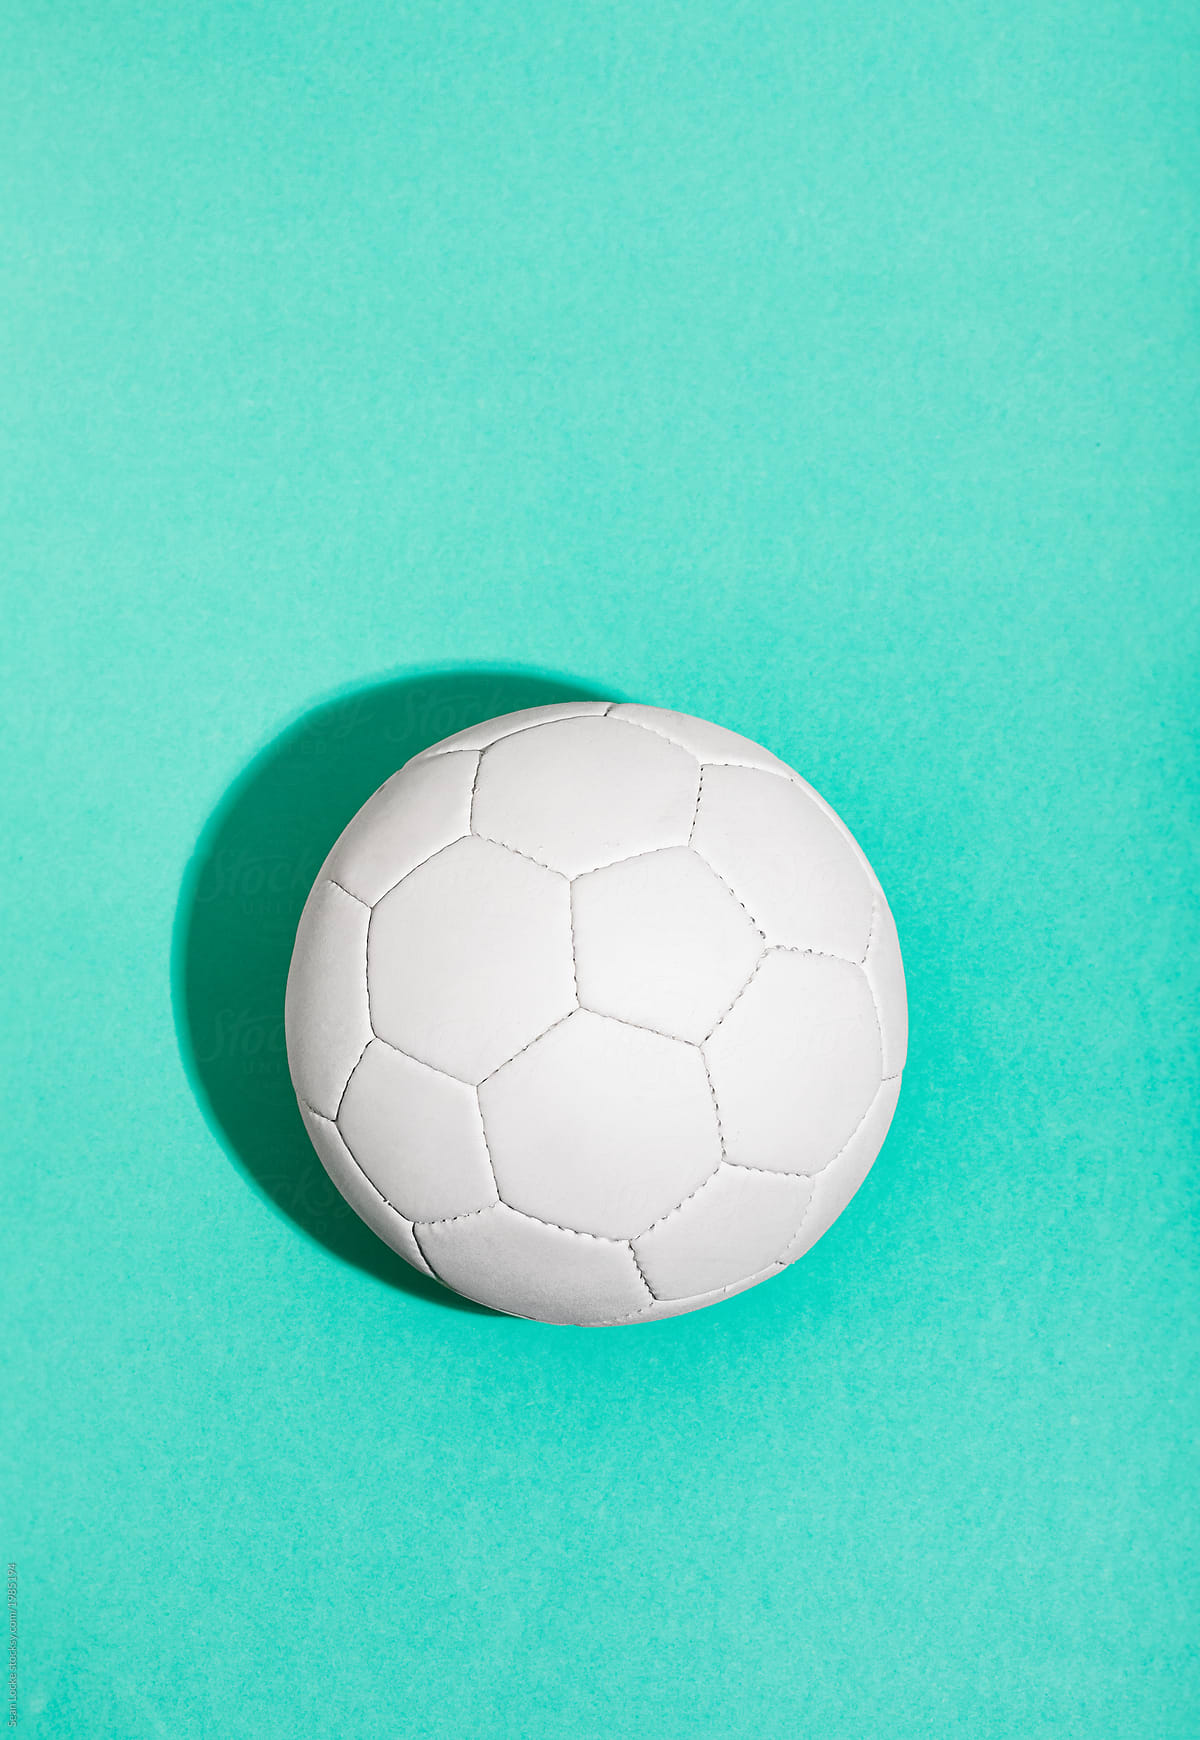 Soccer Ball On Sea Green Background